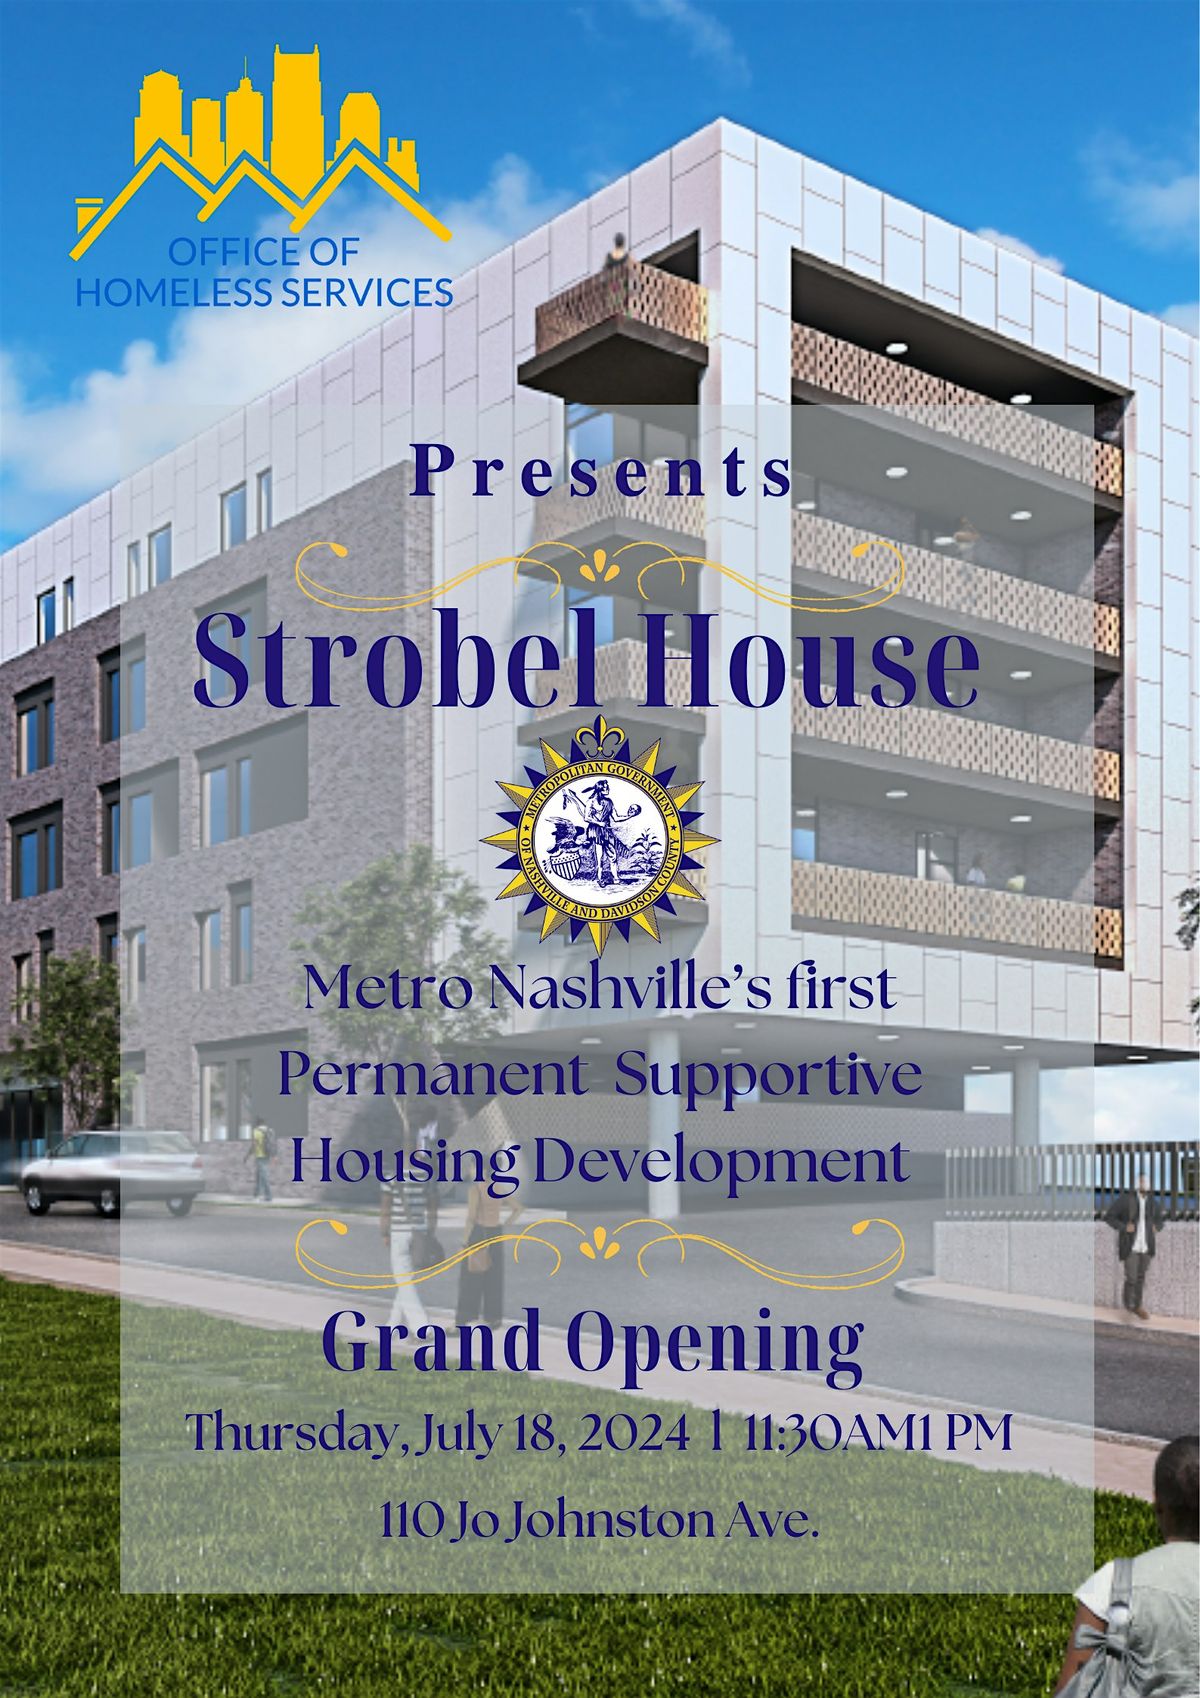 Strobel House Grand Opening and Ribbon Cutting Ceremony